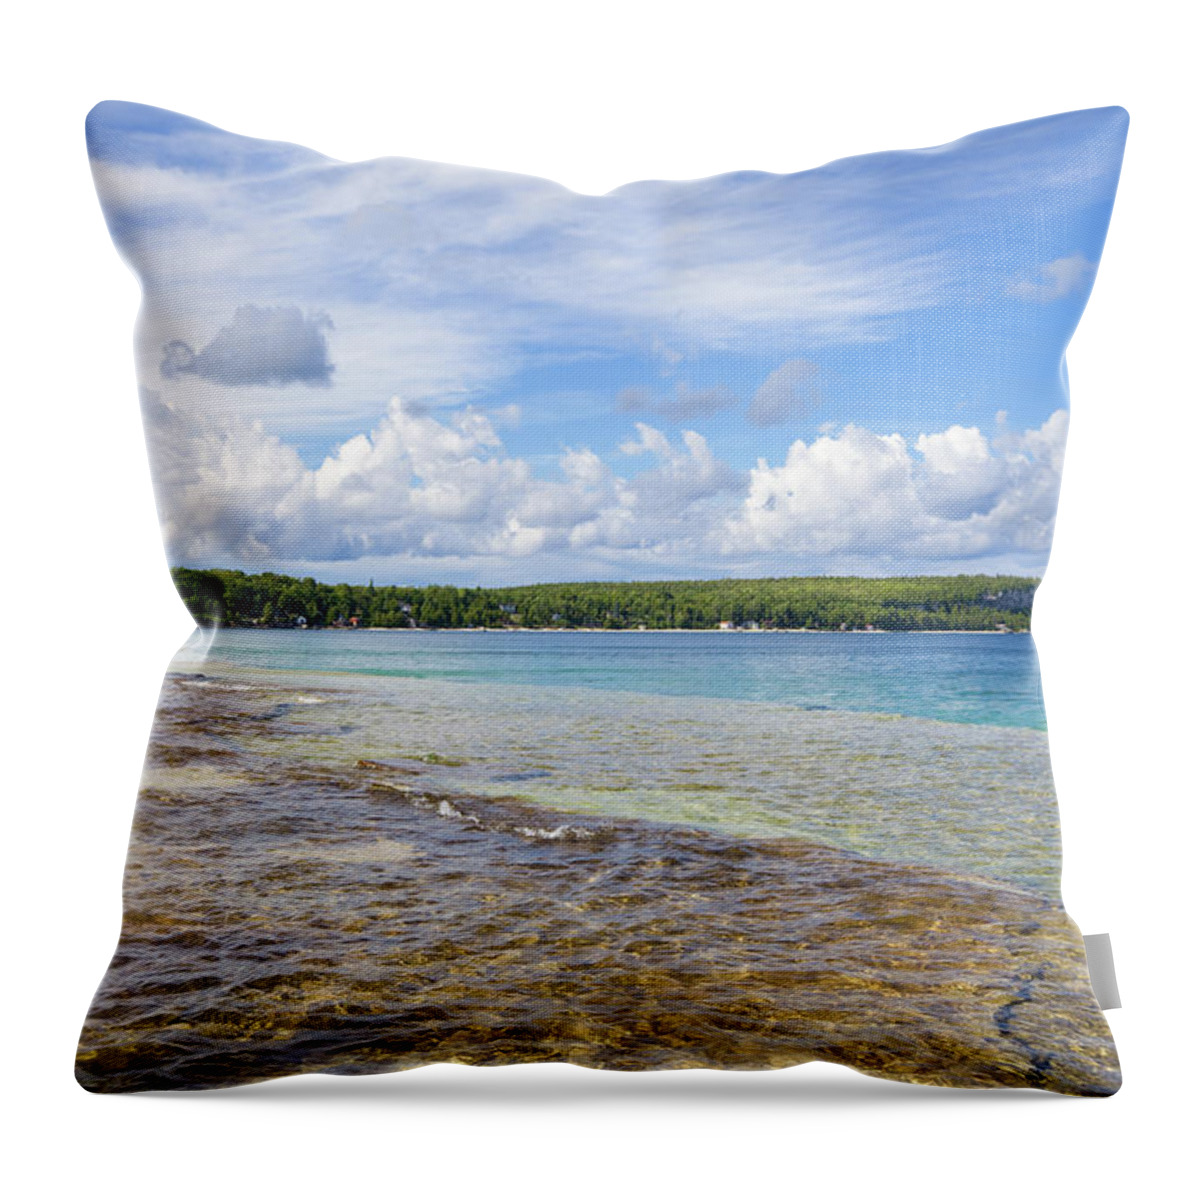 Scenics Throw Pillow featuring the photograph Bruce Peninsula, Ontario, Canada by Benedek